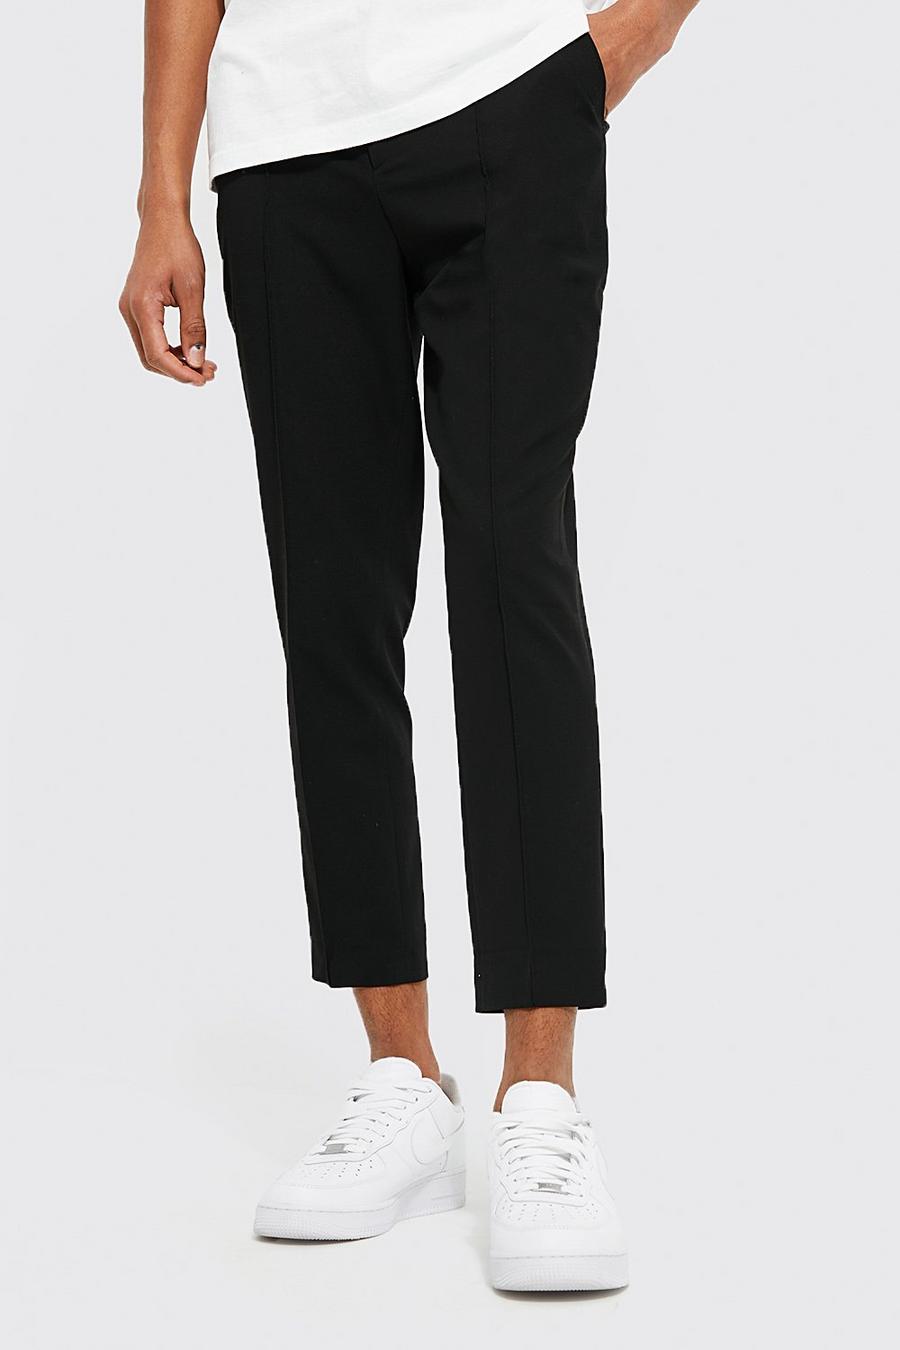 Black Skinny Plain Tapered Smart Pants With Pintuck